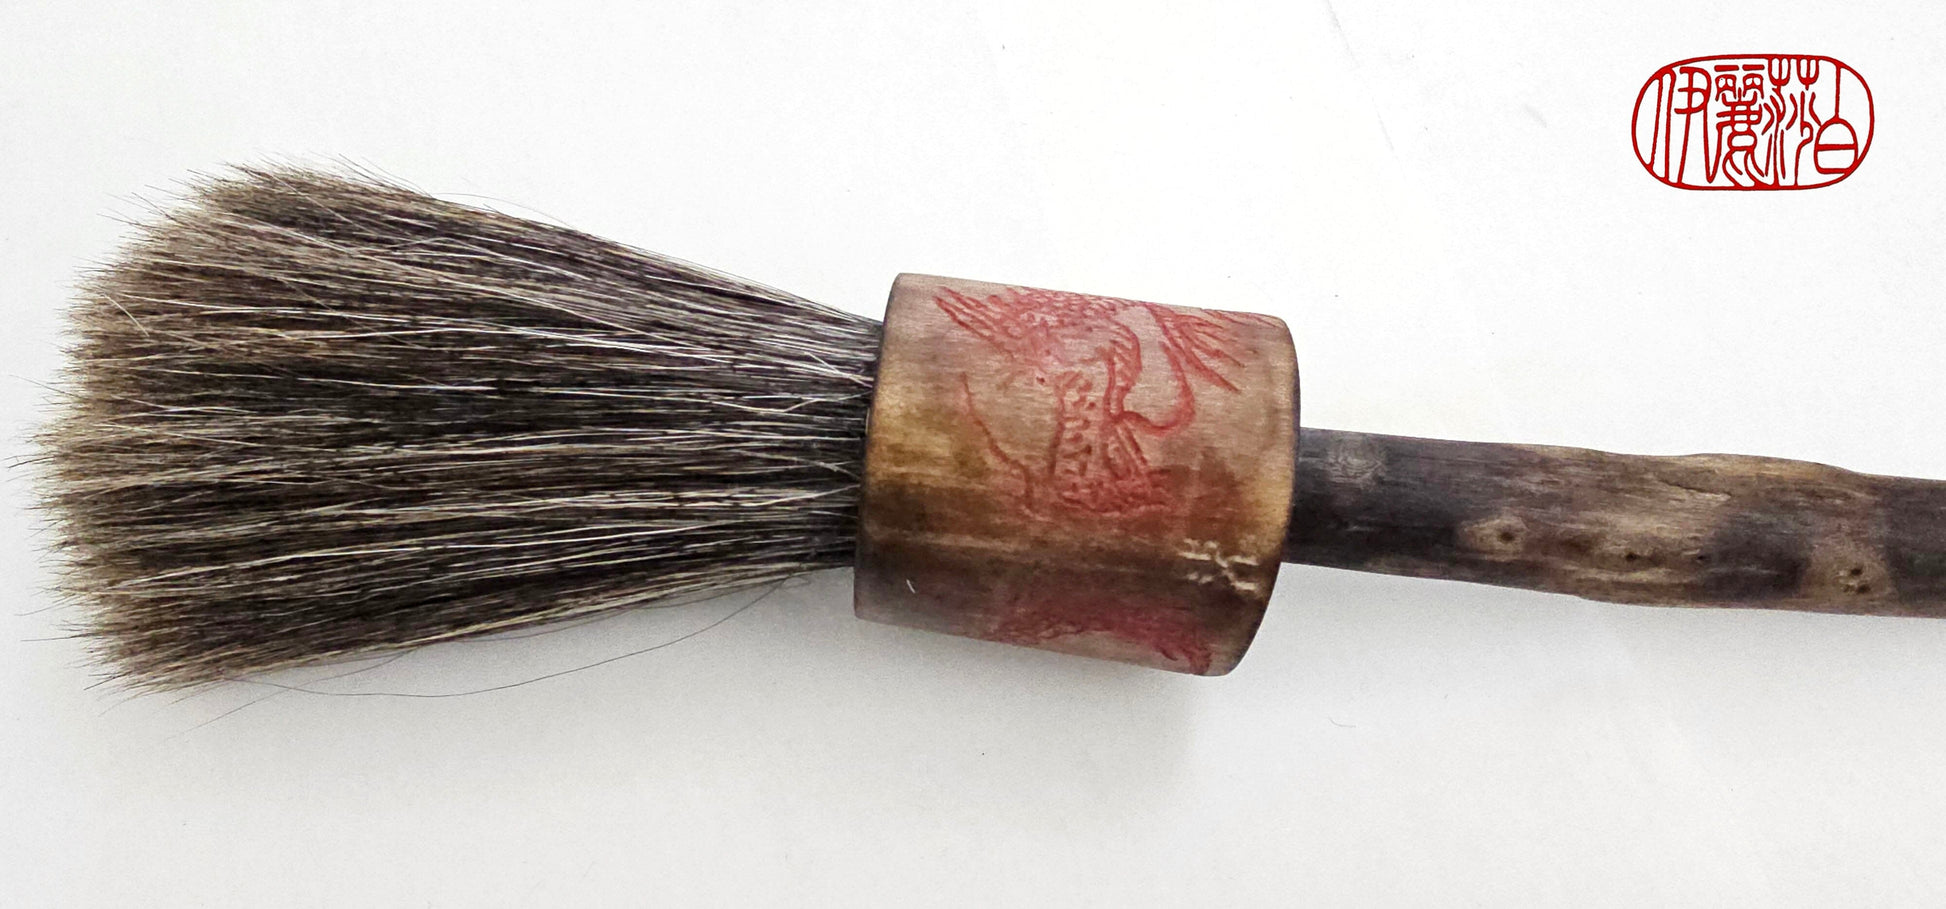 Artisan-Crafted Sumi-e Style Painter's Brush for Large-Scale Art With Engraved Dragon Sumi-e Paintbrush Elizabeth Schowachert Art